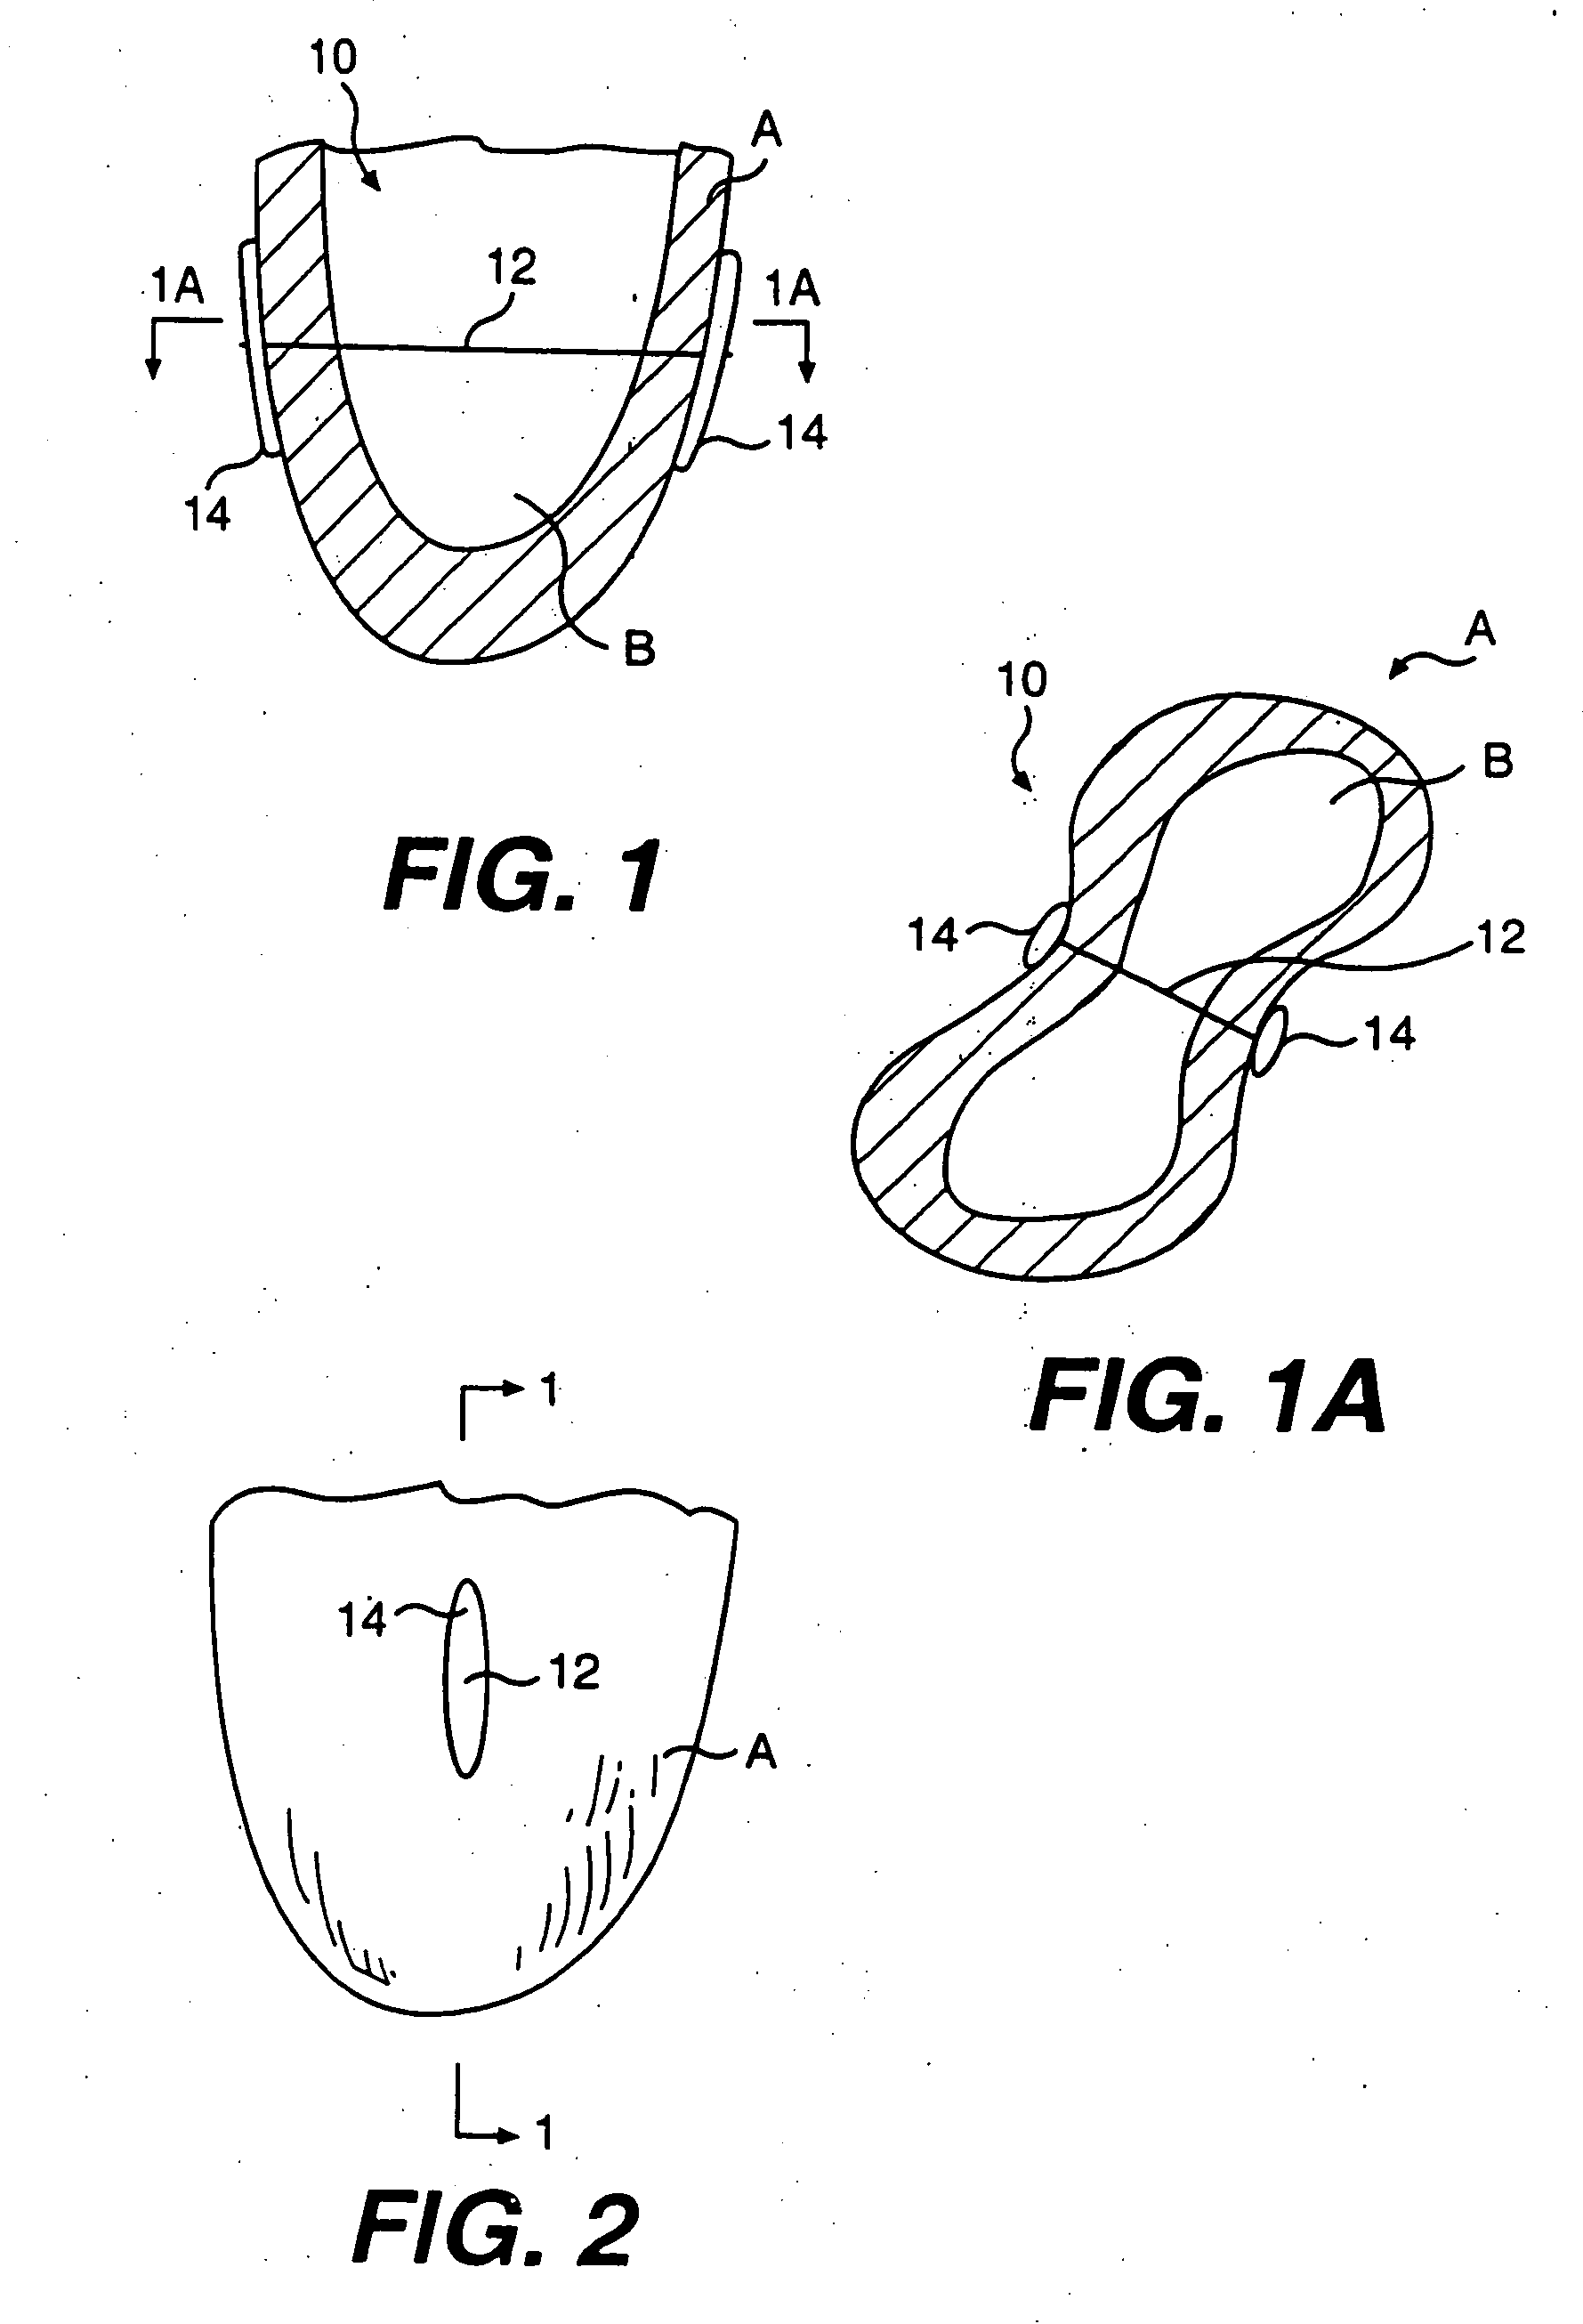 Transventricular implant tools and devices